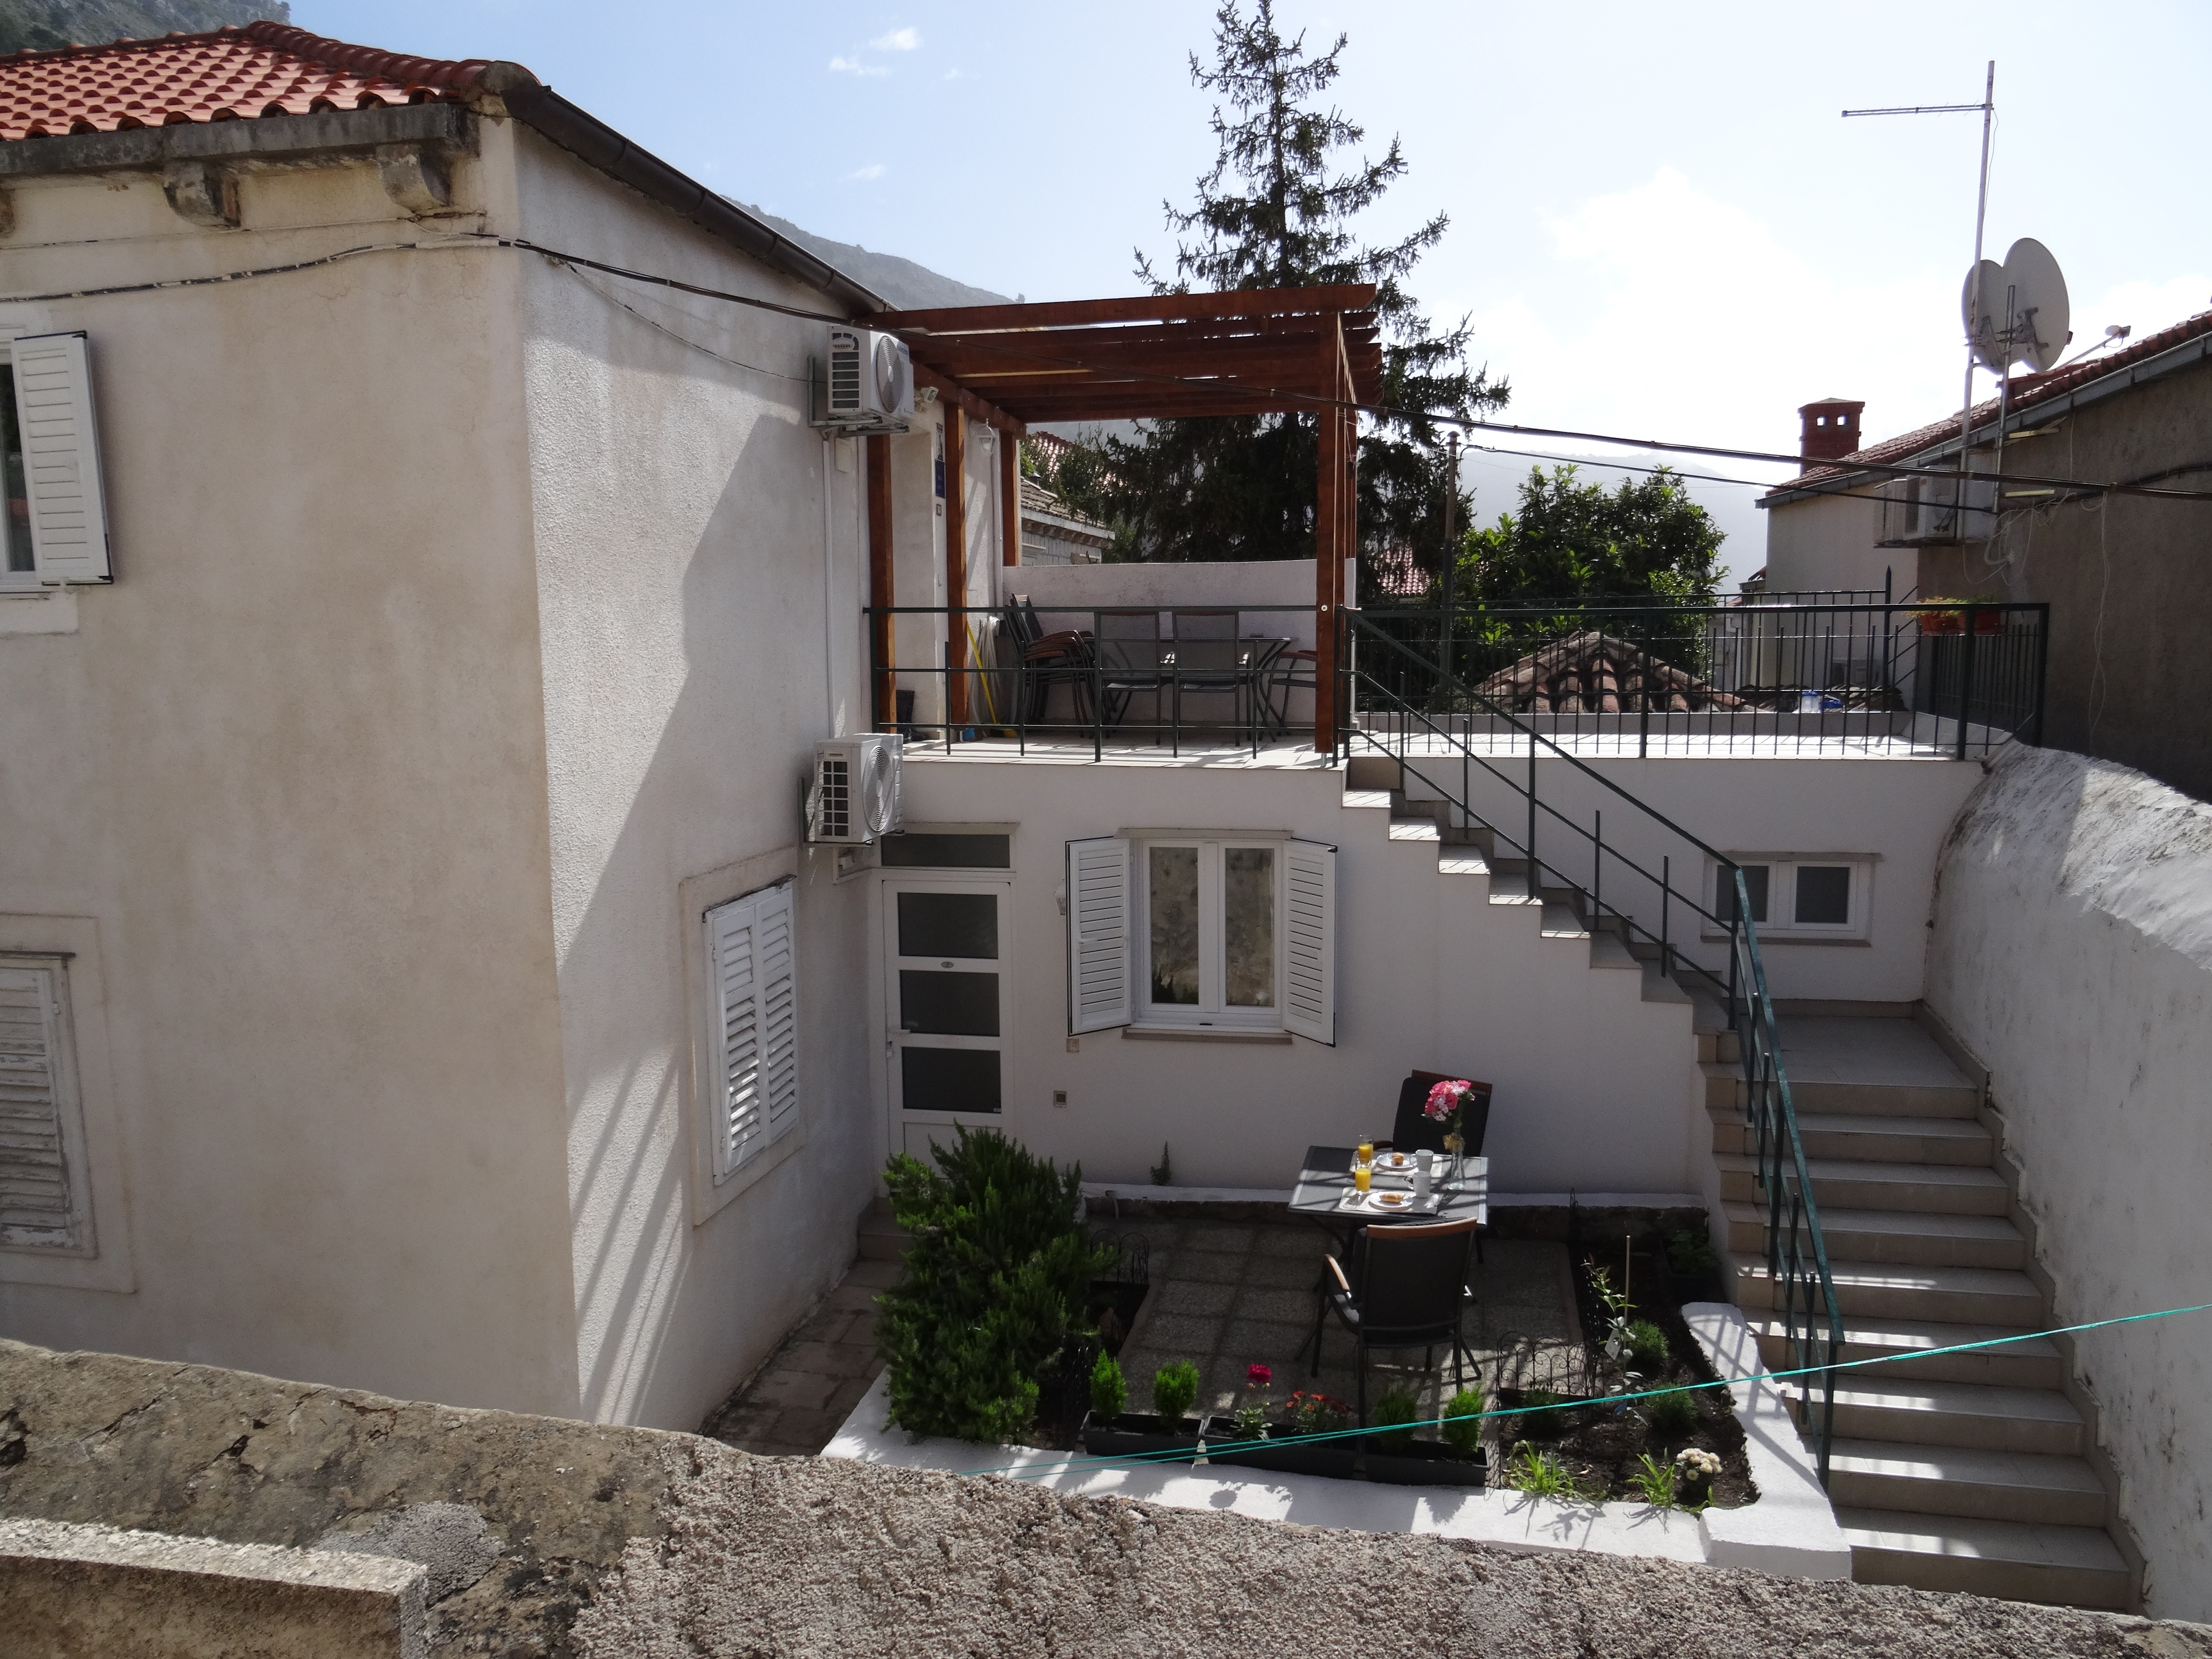 Only Apartments - Studio Apartment with Patio   Dubrovnik